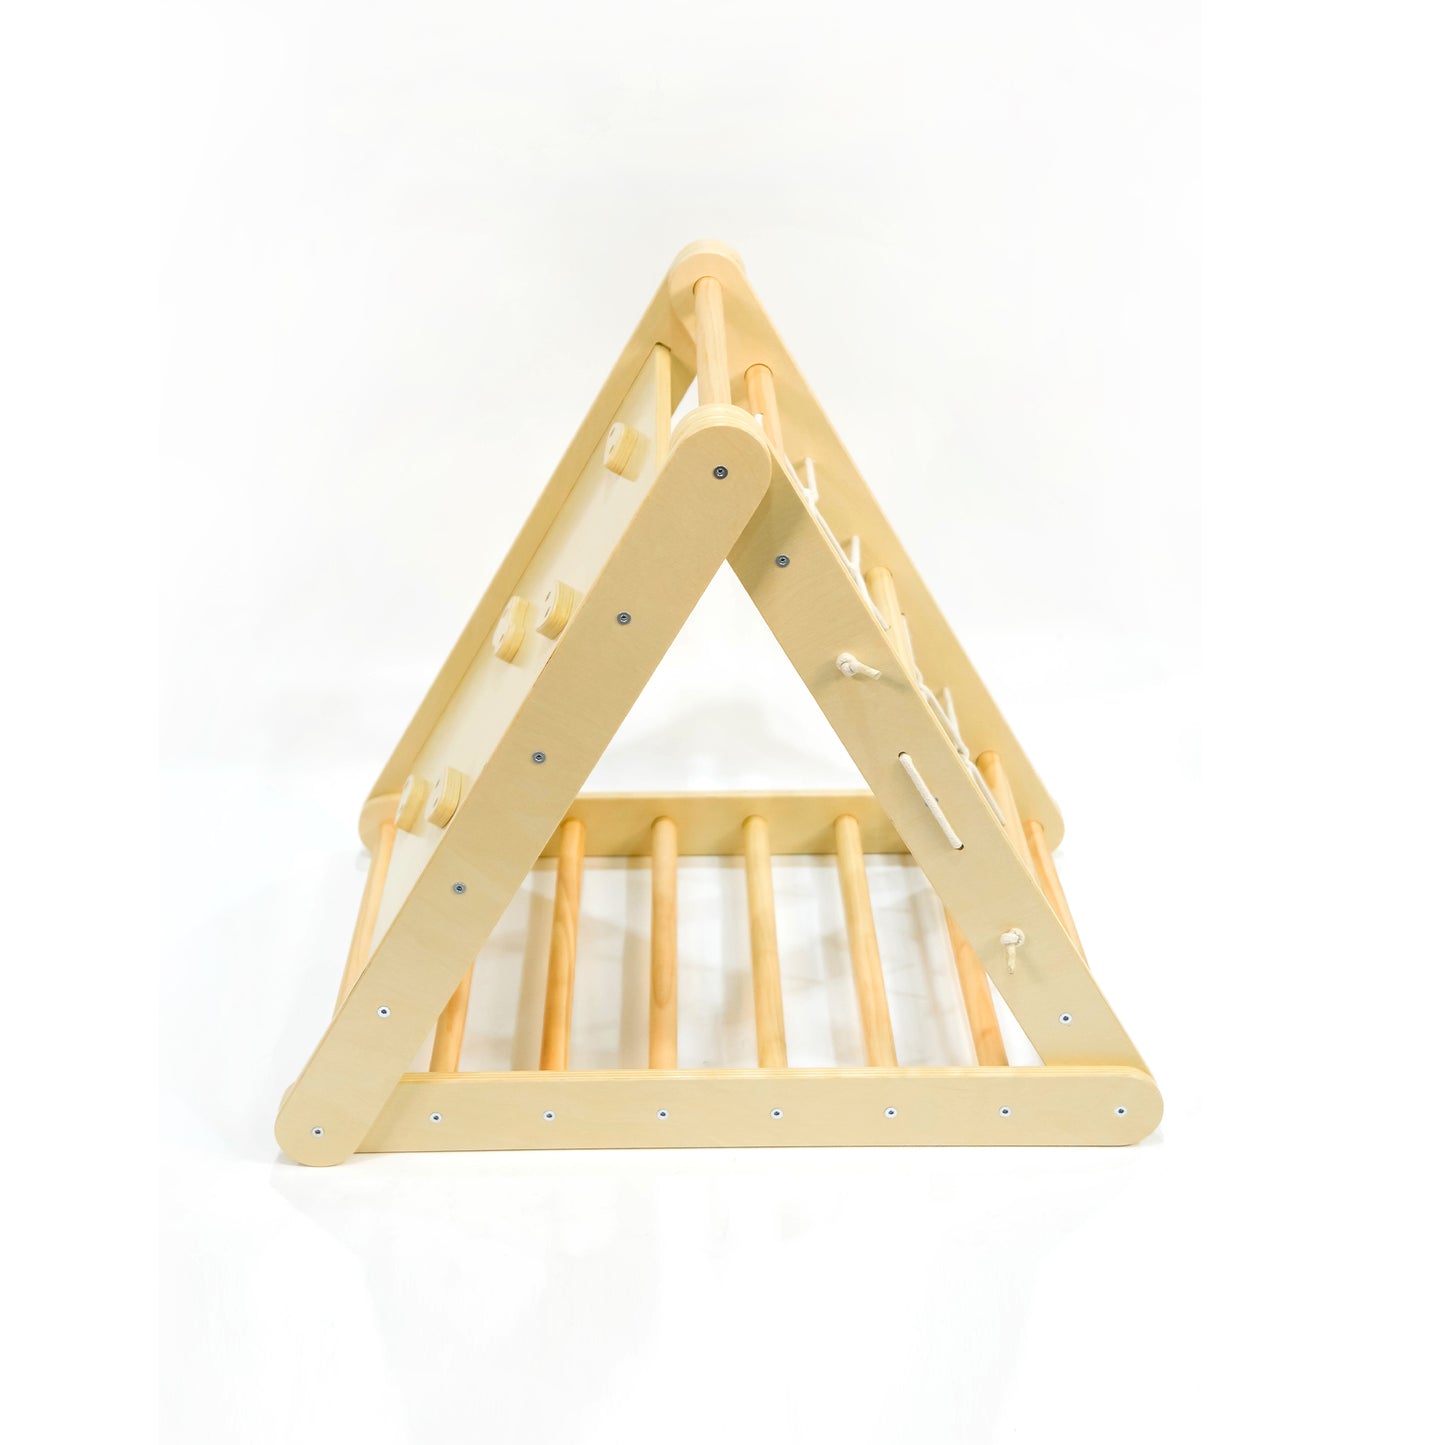 Side profile shot of the Pikler Climbing Triangle, displaying its sturdy wooden frame and side climbing features against a seamless white background.